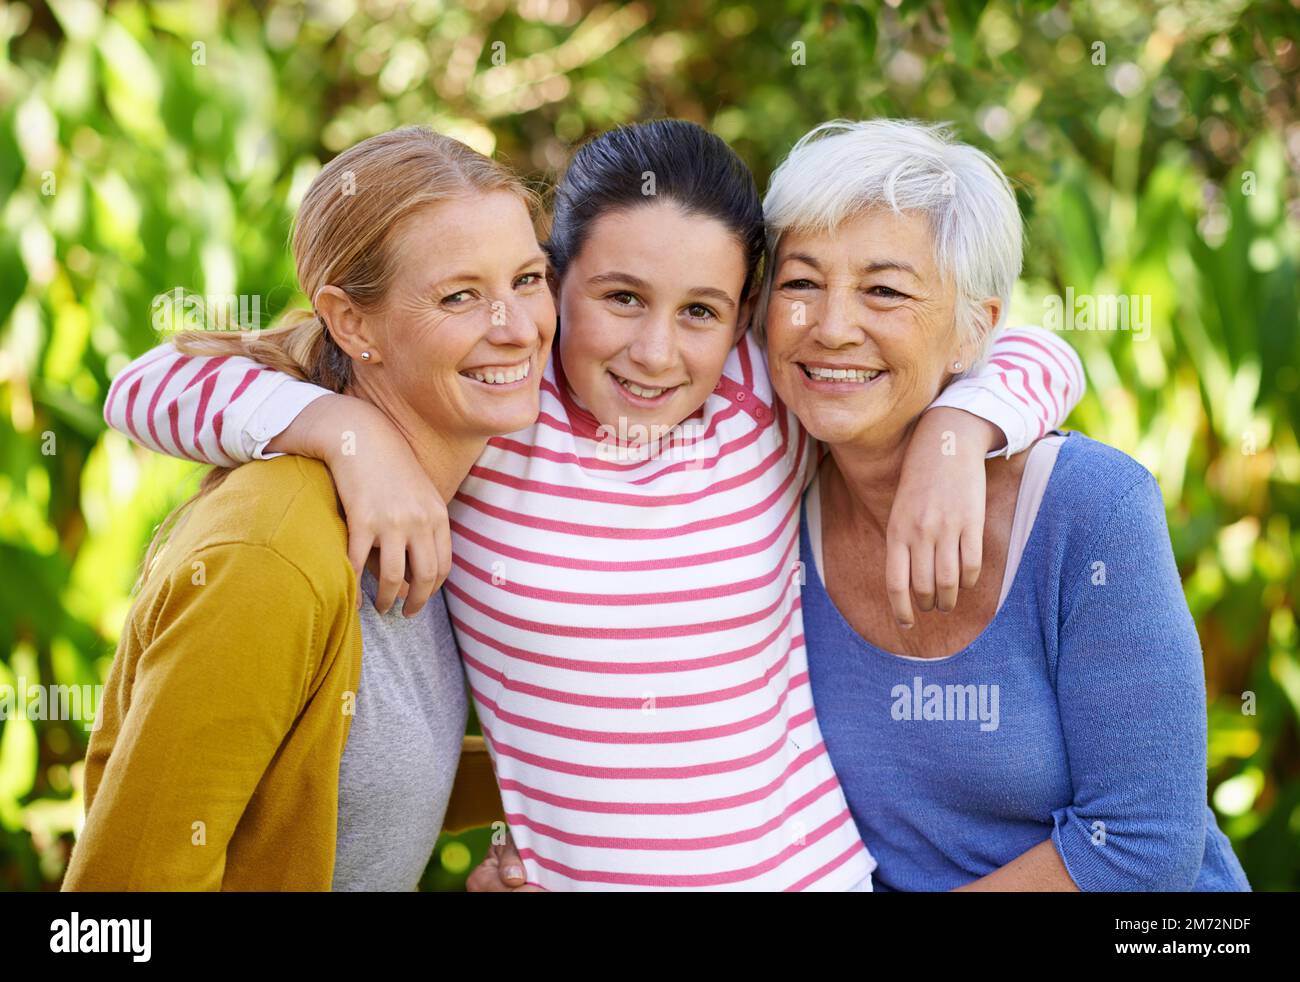 Were a close-knit family. three generations of family women standing outdoors. Stock Photo